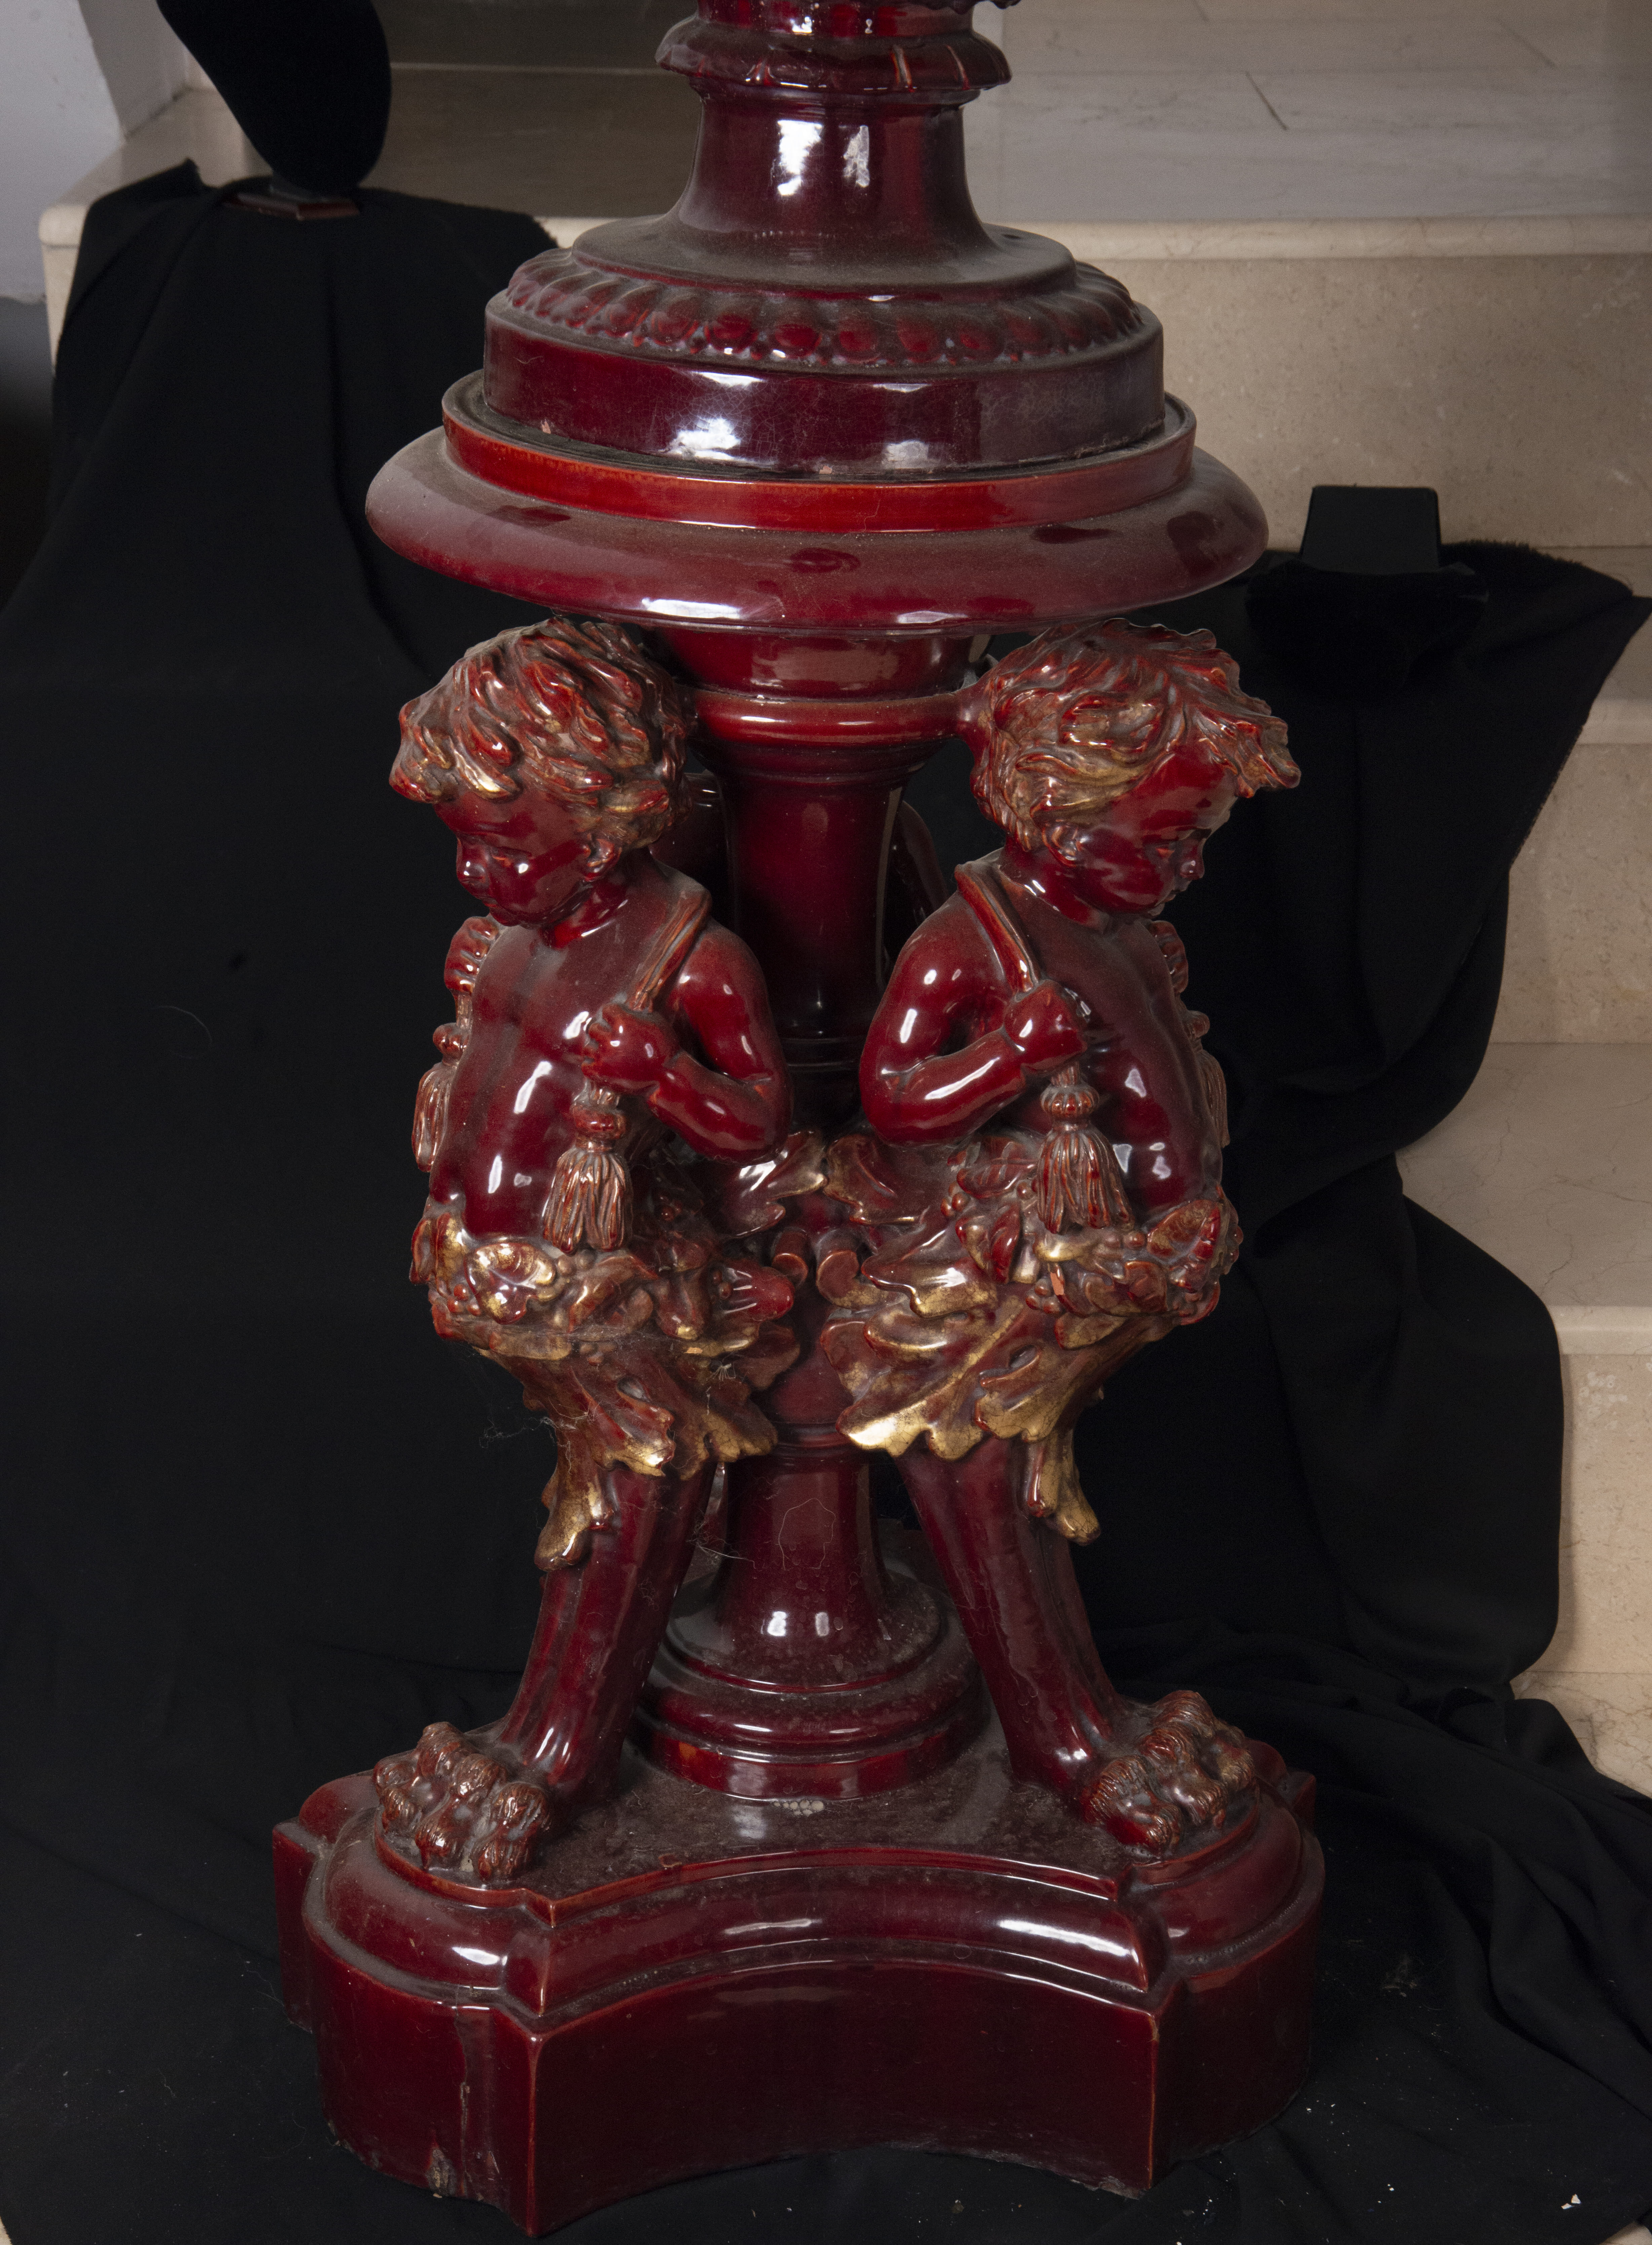 Large French Planter in red glazed and polychrome stoneware in the Art Nouveau style, around 1900, l - Image 2 of 5